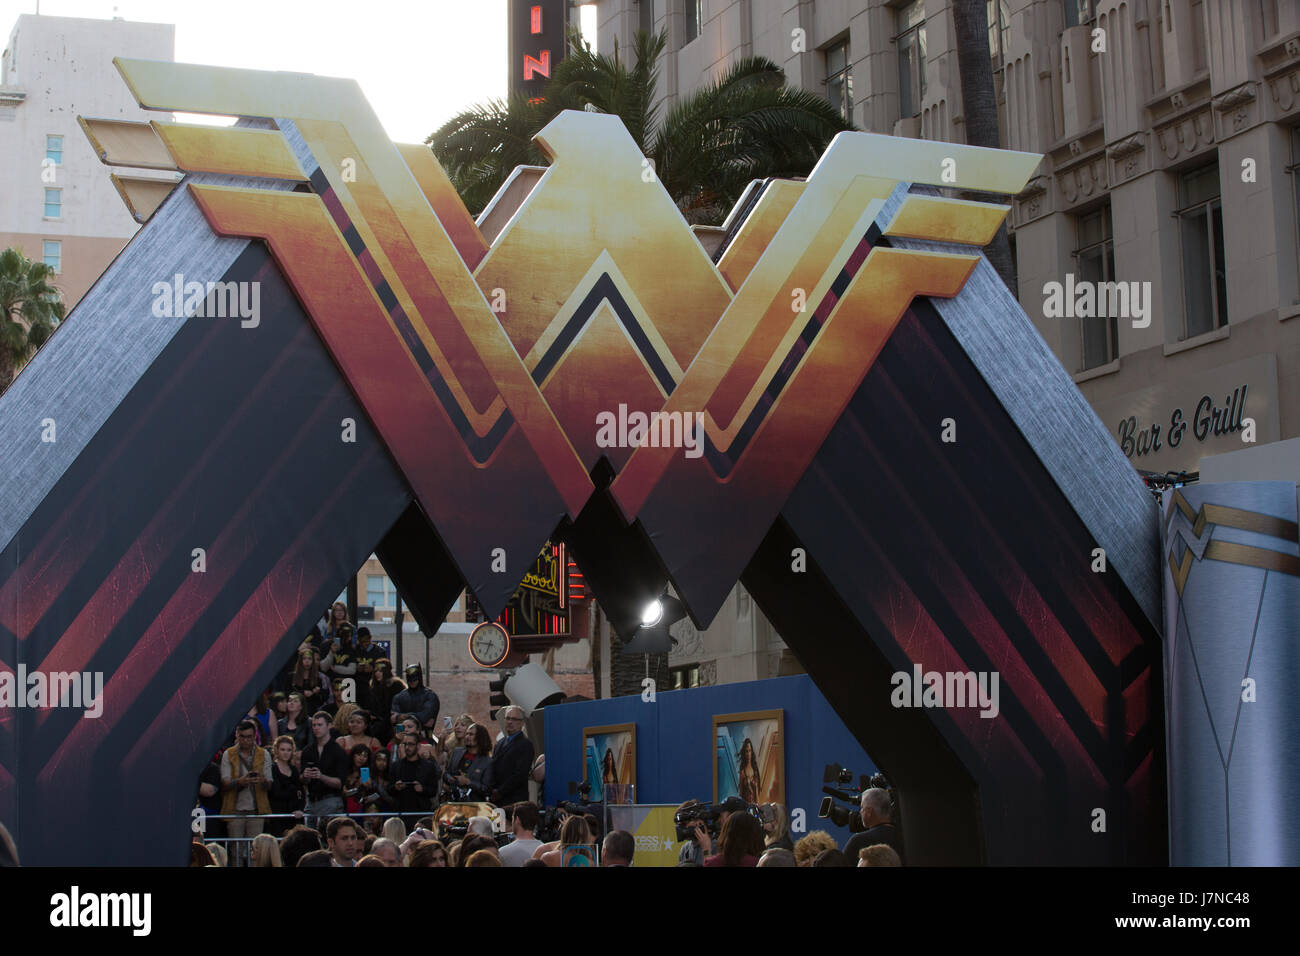 Hollywood, California, USA. 25th May, 2017. Atmosphere at the Premiere of Warner Bros. Pictures' 'Wonder Woman' at the Pantages Theatre on May 25, 2017 in Hollywood, California. Credit: The Photo Access/Alamy Live News Stock Photo